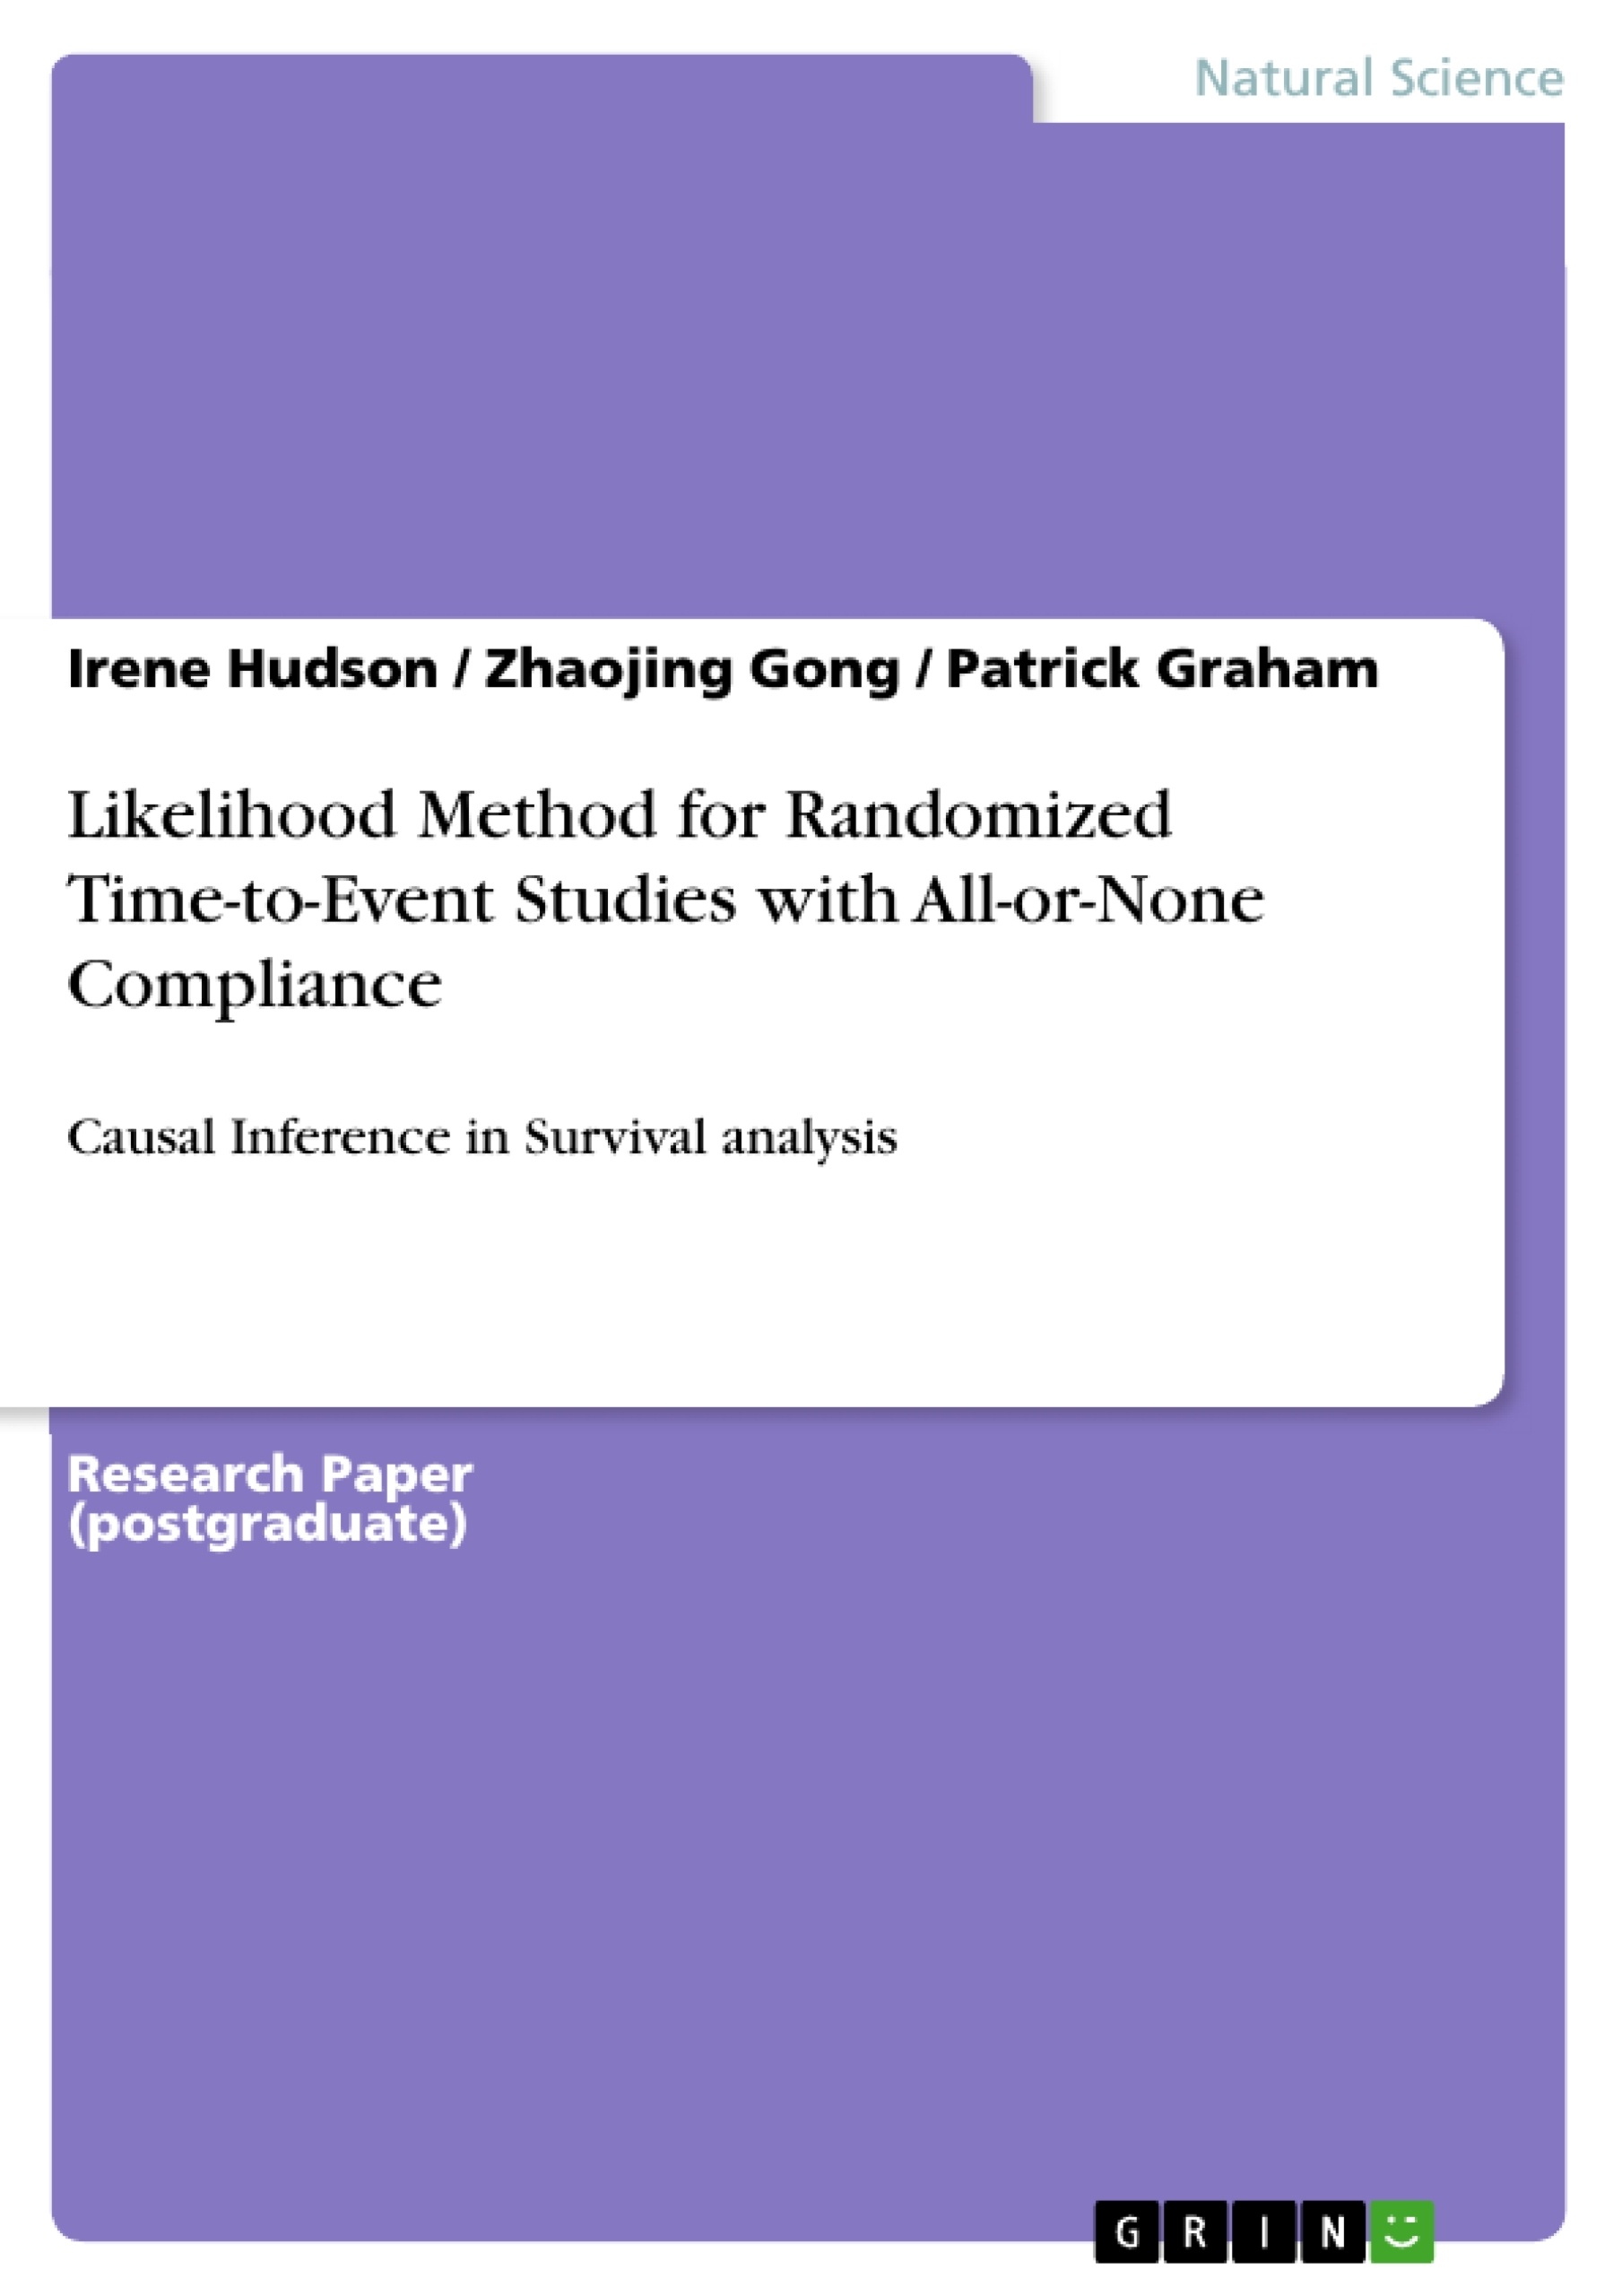 Titre: Likelihood Method for Randomized Time-to-Event Studies with All-or-None Compliance